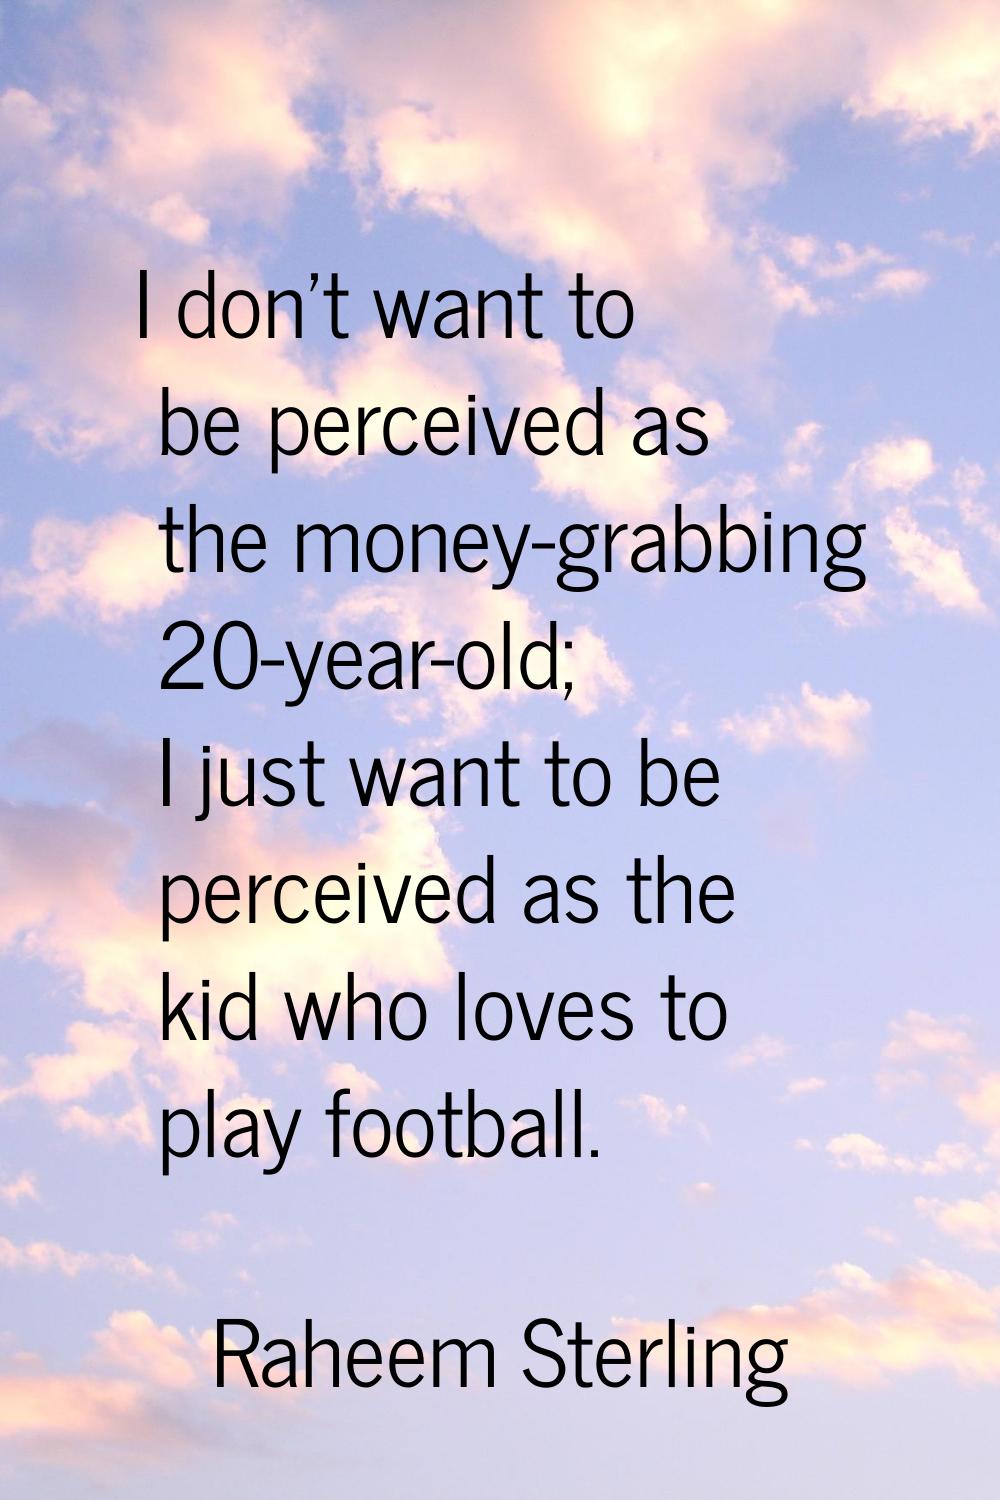 I don't want to be perceived as the money-grabbing 20-year-old; I just want to be perceived as the 